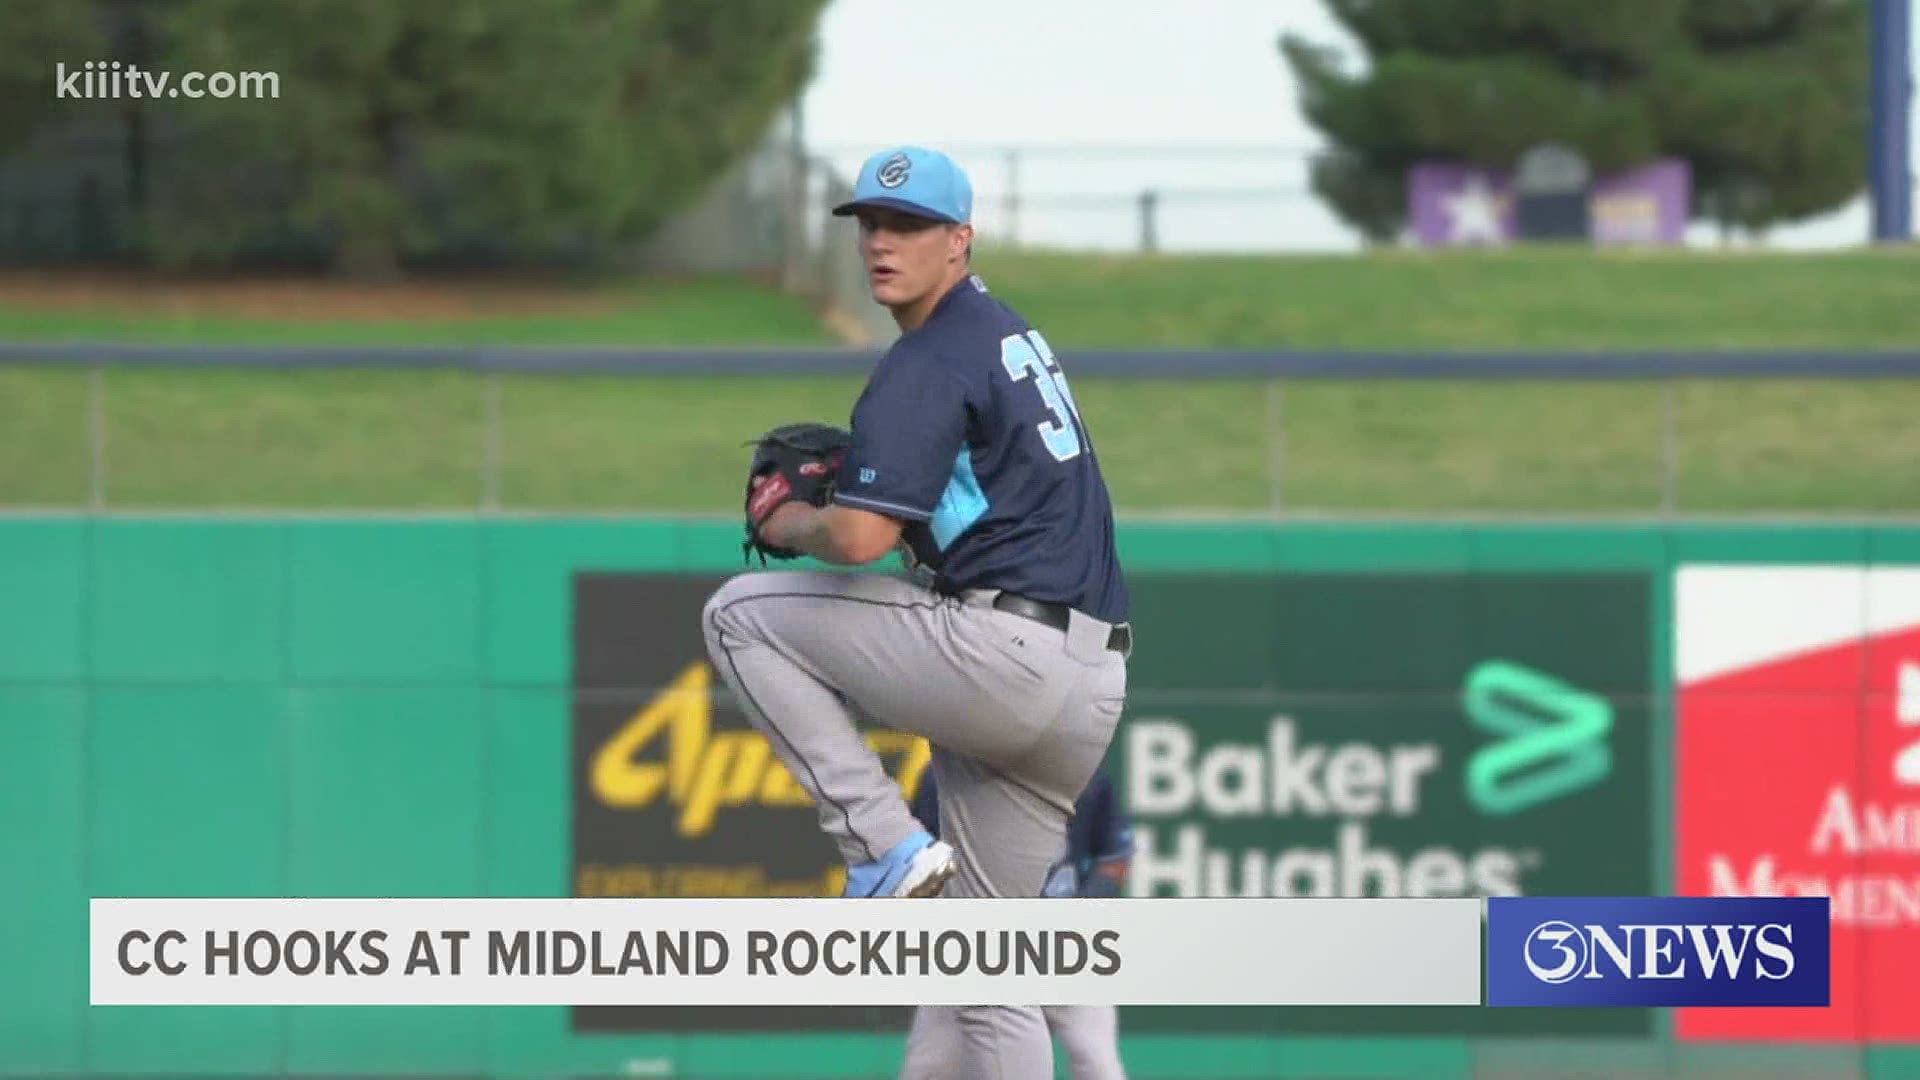 Corpus Christi fell behind early and couldn't get the offense going in a 9-1 loss to the Rockhounds Tuesday. Highlights courtesy KWES-TV.